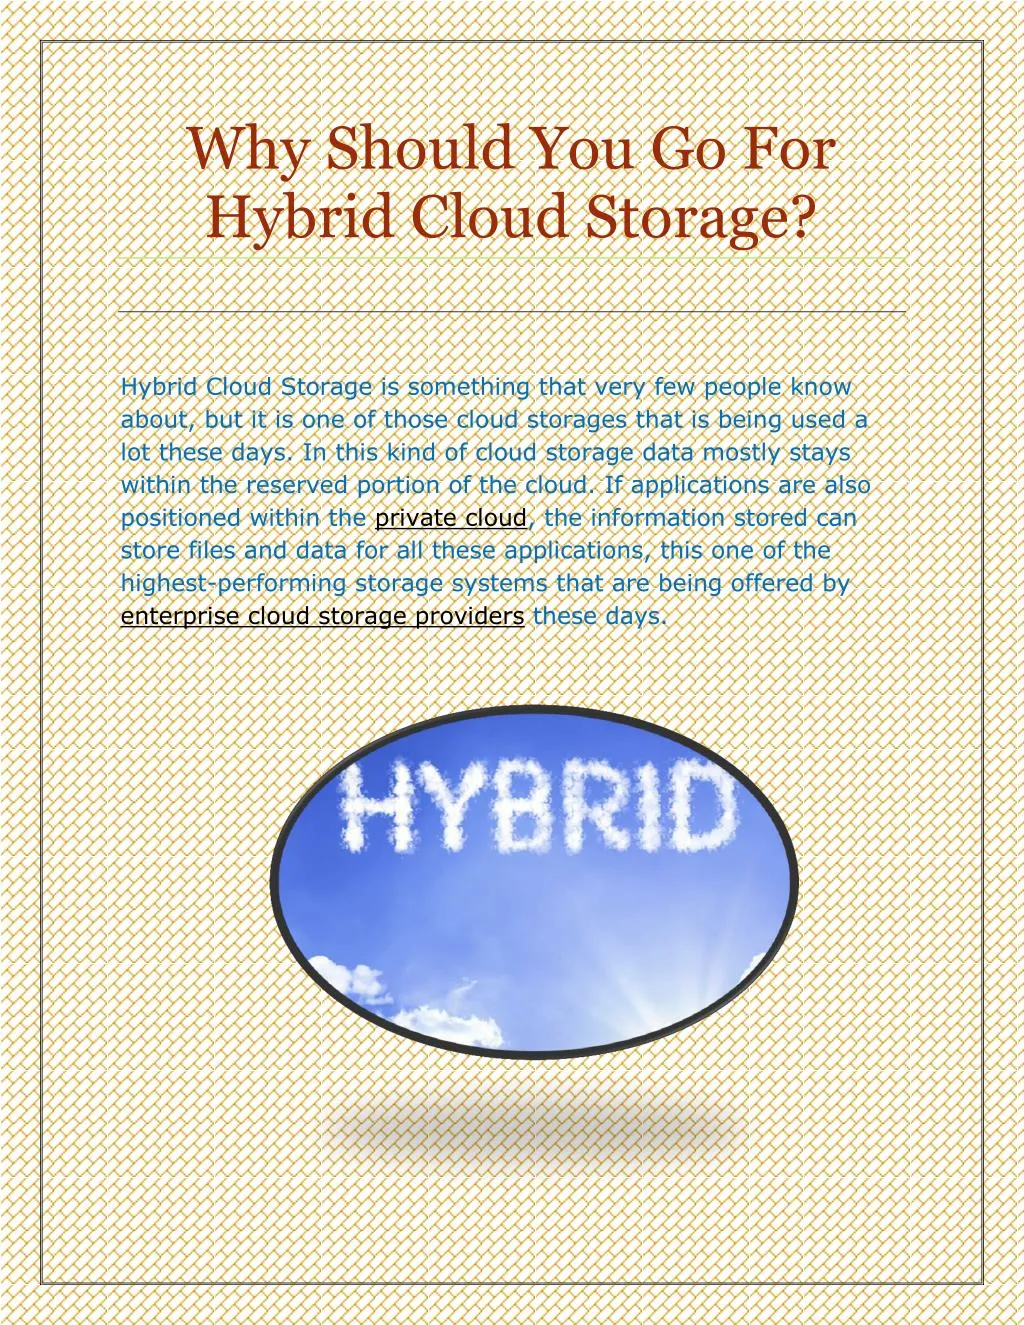 why should you go for hybrid cloud storage